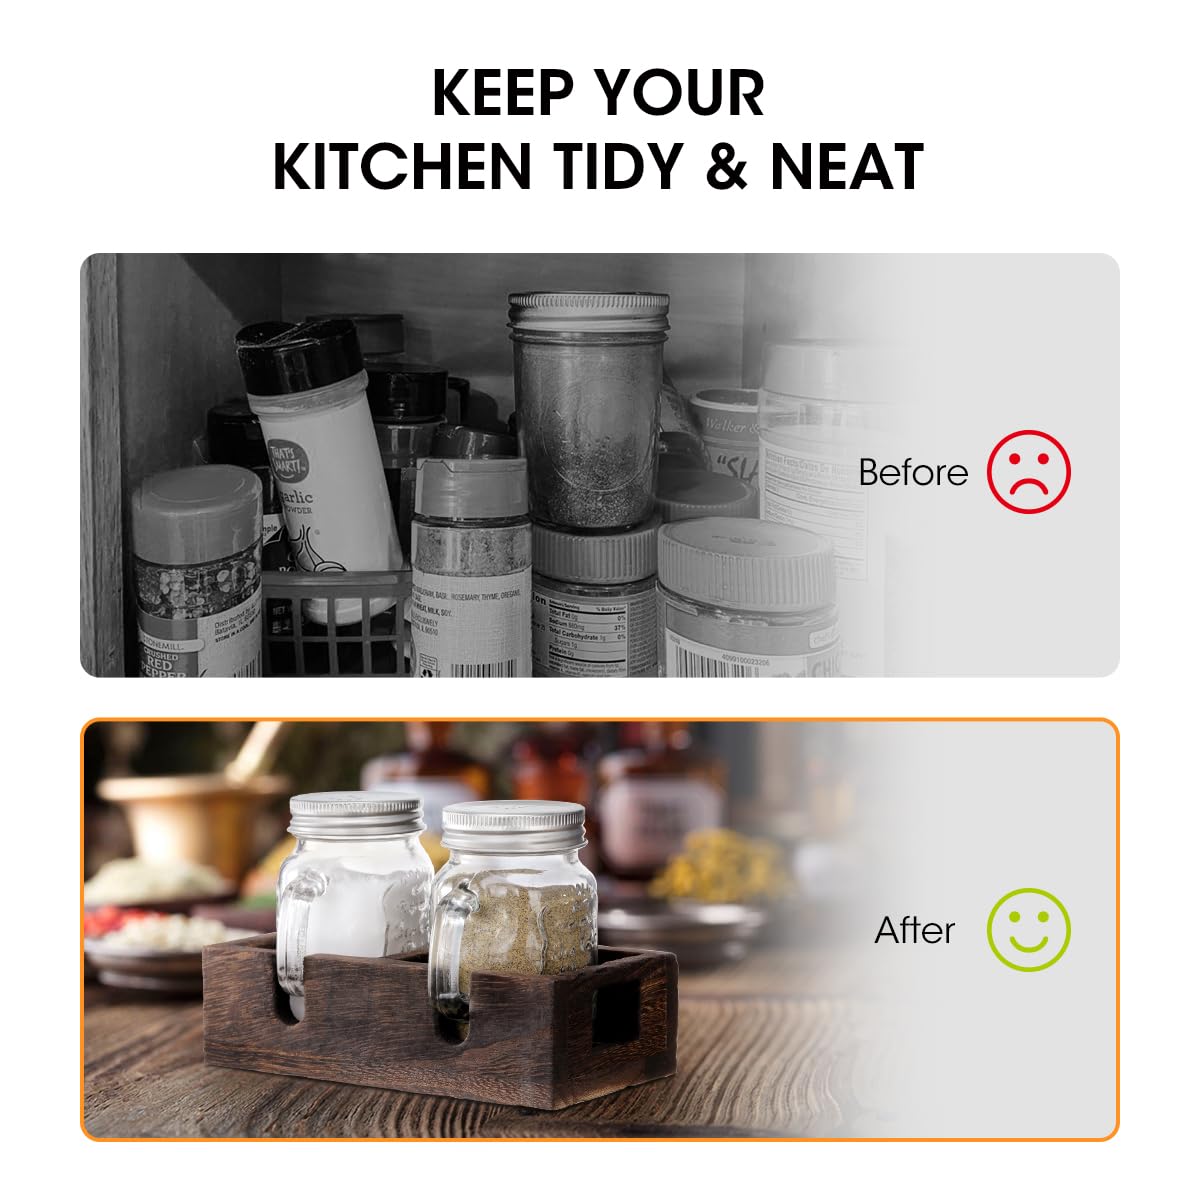 keep your kitchen tidy & neat